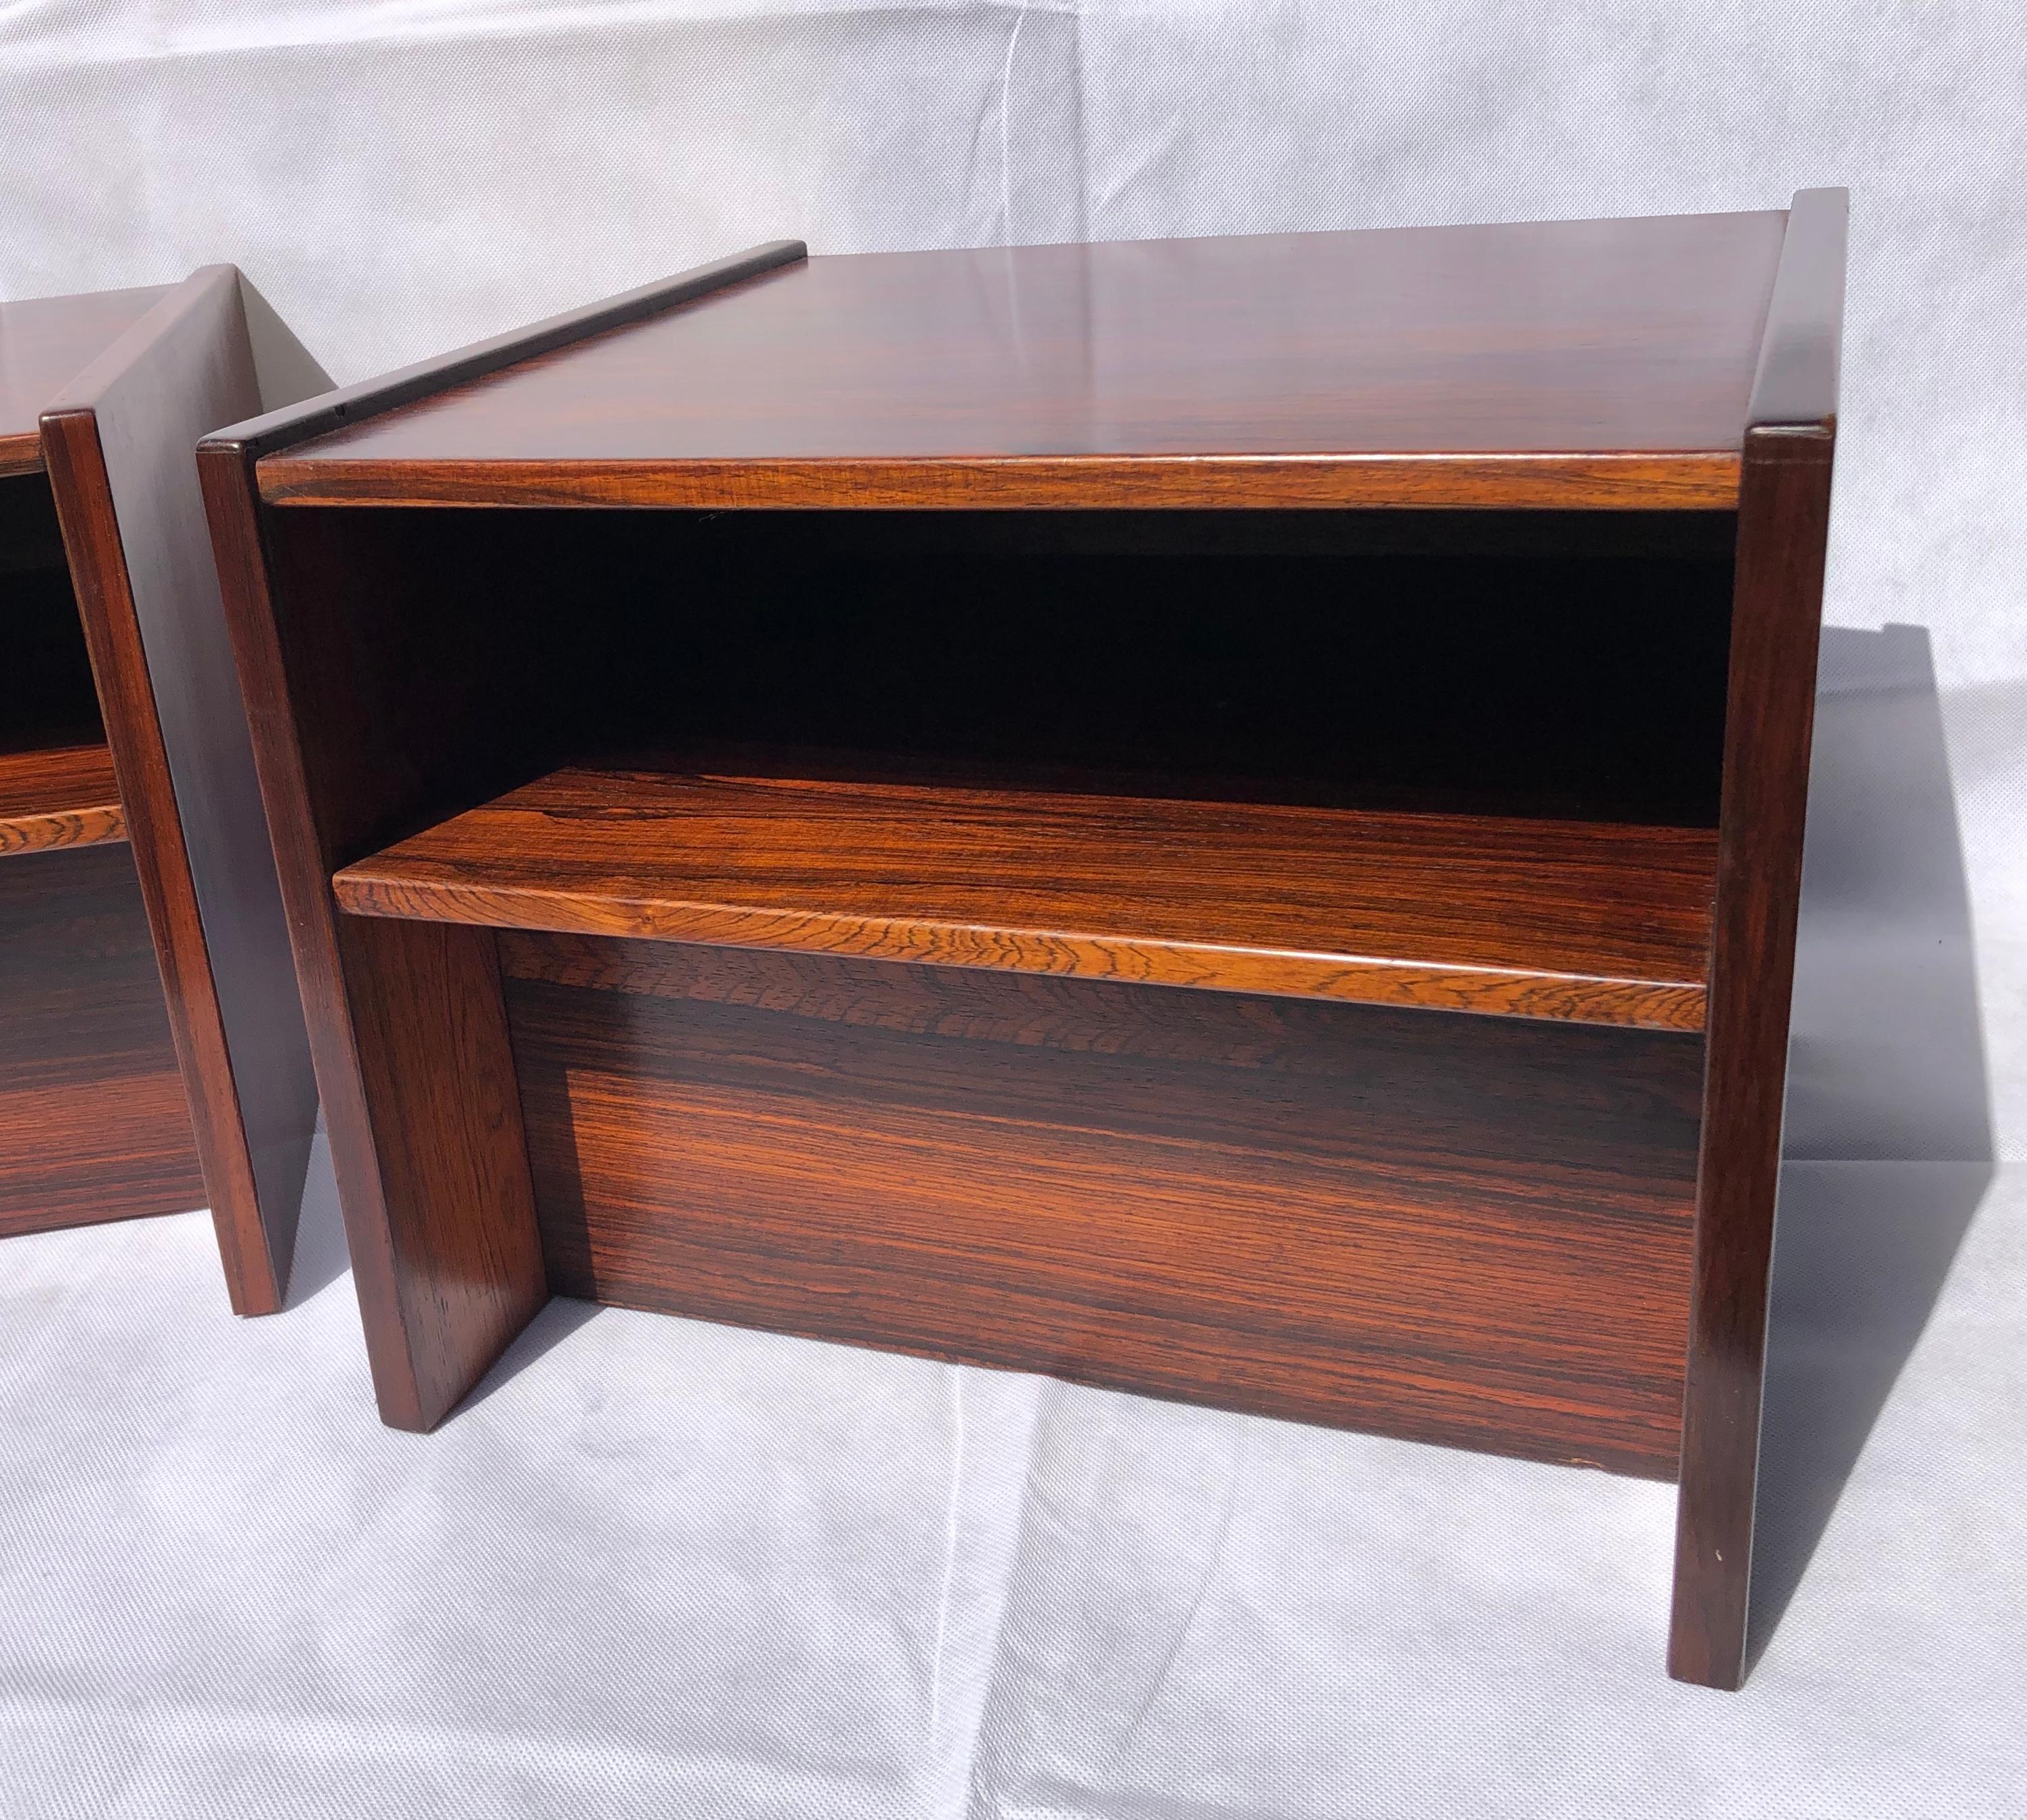 Pair of Danish Mid Century rosewood bedside tables / nightstands, 1970s

Pair of stunning midcentury rosewood bedside tables cabinets, 1970s. 
These are designed to sit against a wall, square in shape, below the top surface is there is a cubby